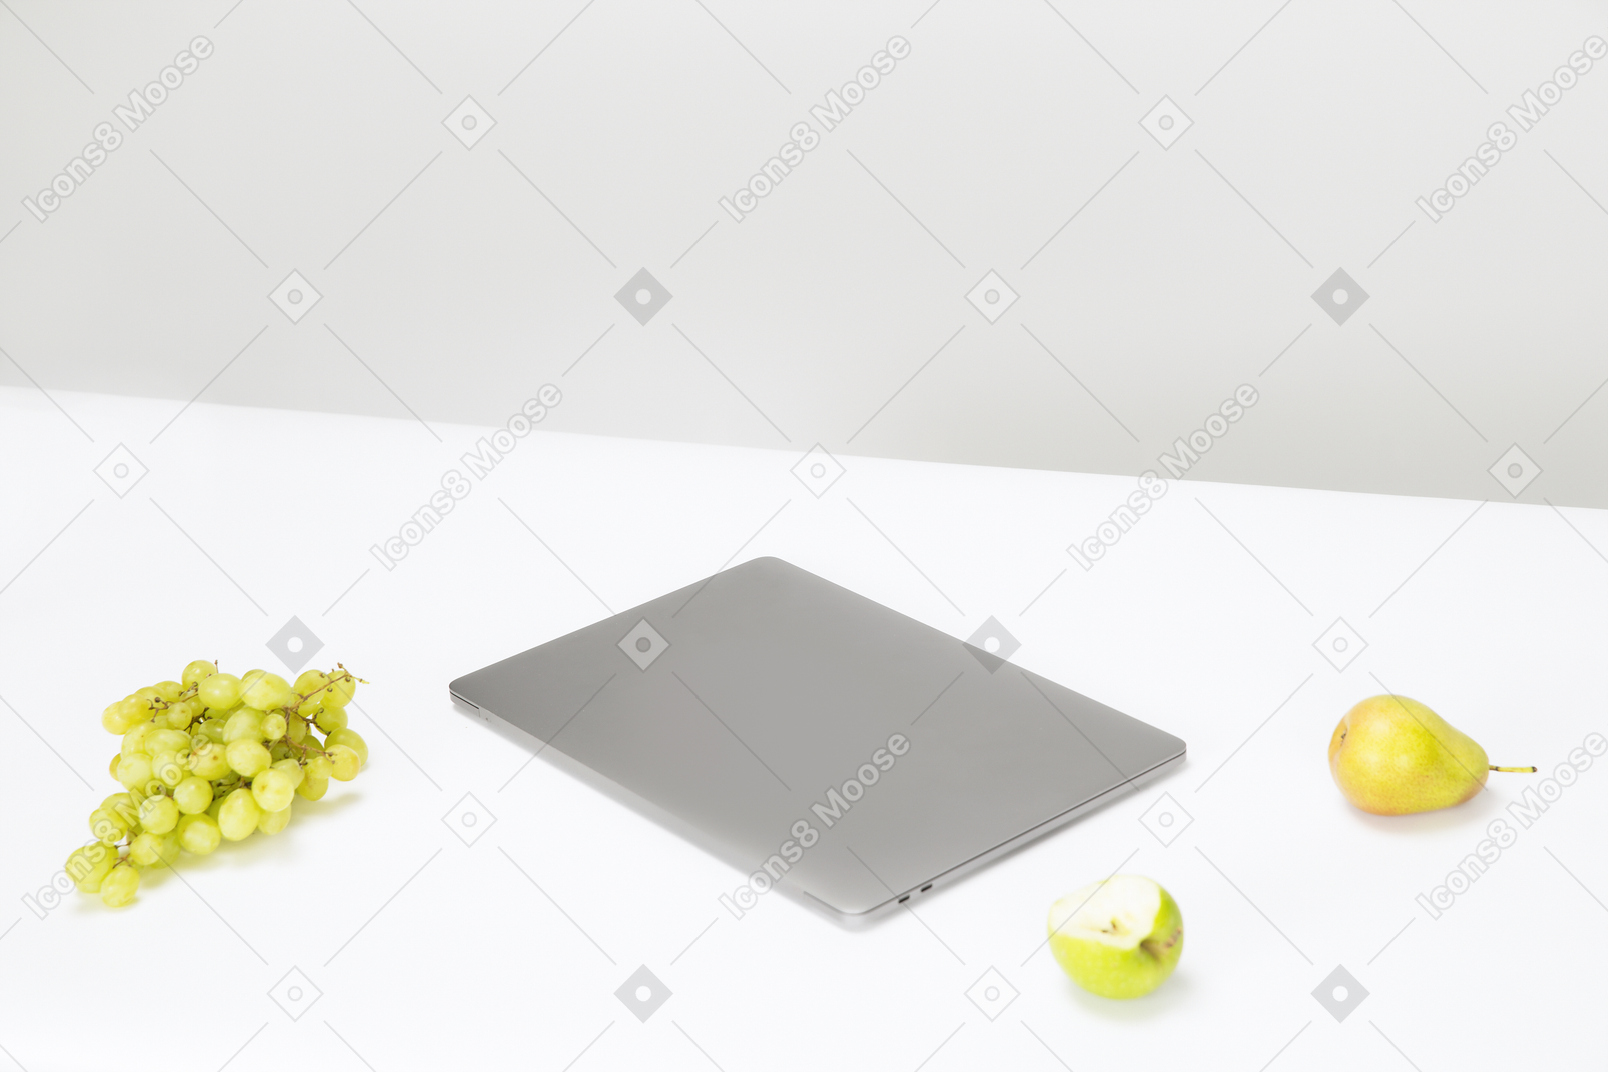 Macbook, branch of grapes and pears